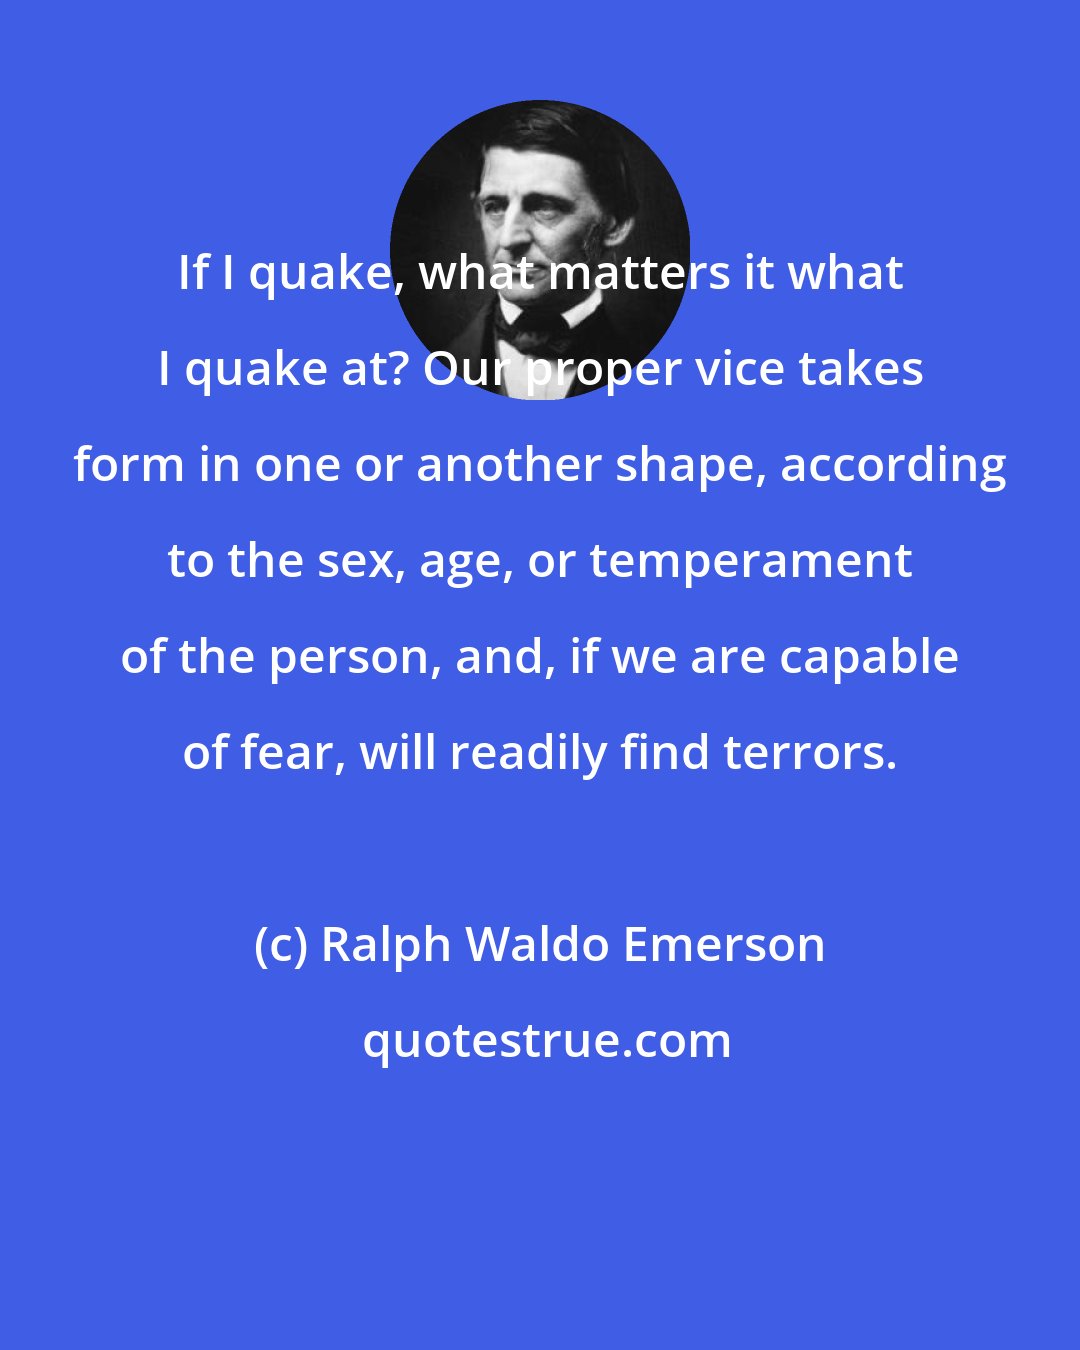 Ralph Waldo Emerson: If I quake, what matters it what I quake at? Our proper vice takes form in one or another shape, according to the sex, age, or temperament of the person, and, if we are capable of fear, will readily find terrors.